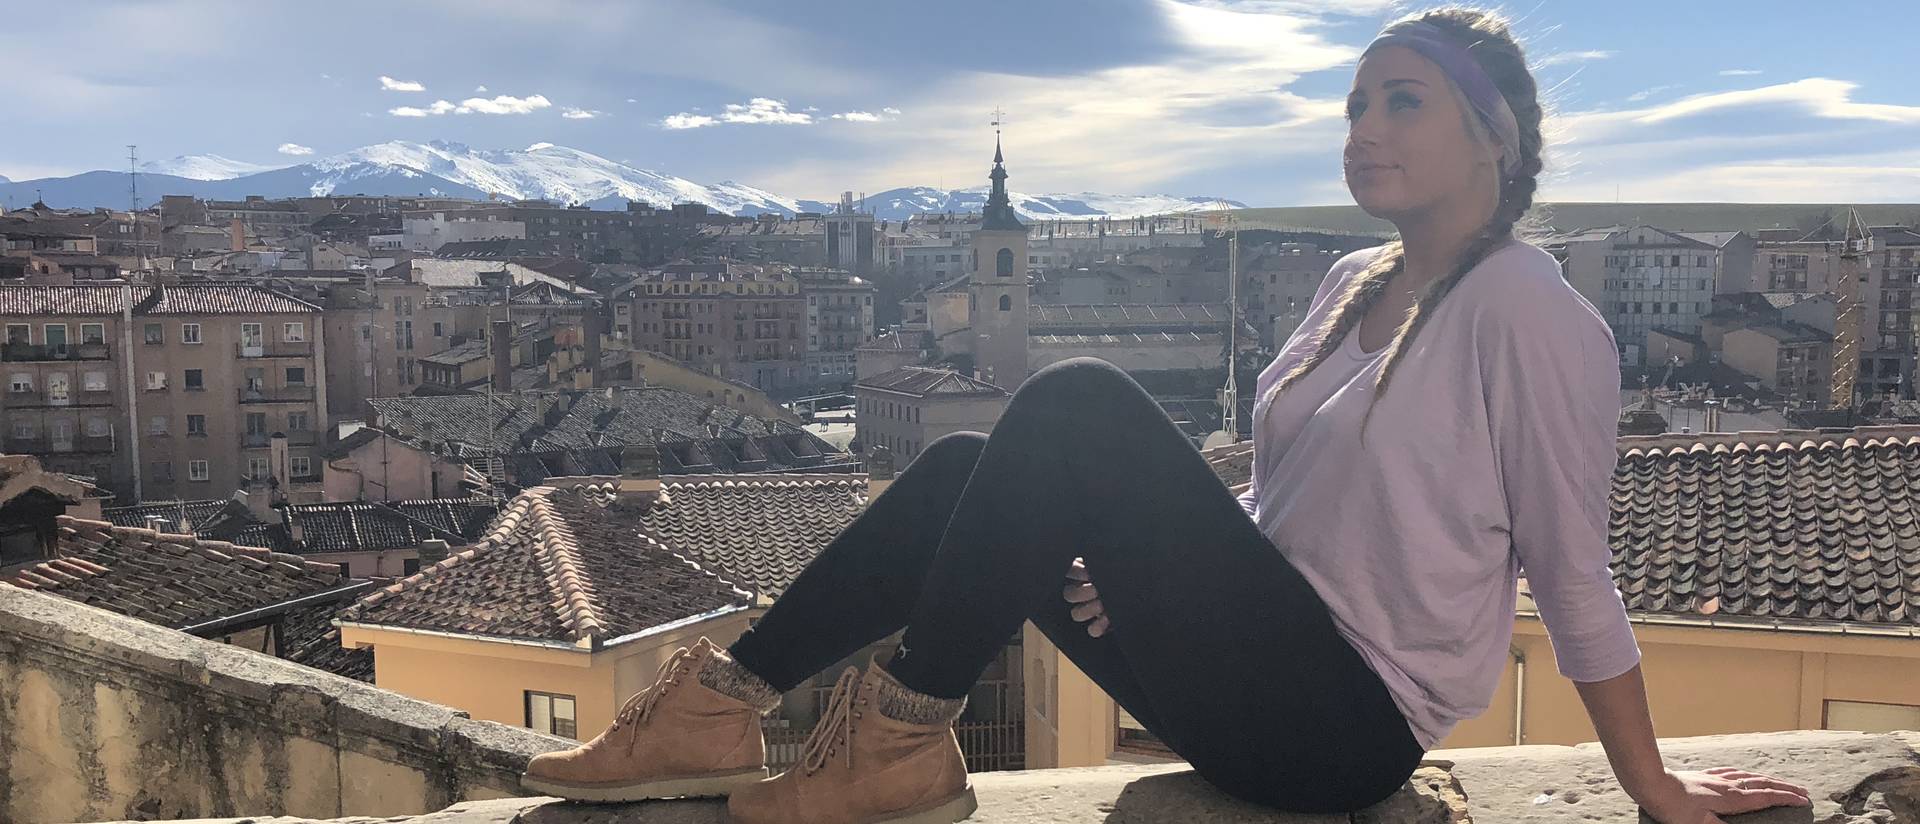 Amanda Flandrich made a lifetime of memories as well as friendships during her time studying abroad in Spain.